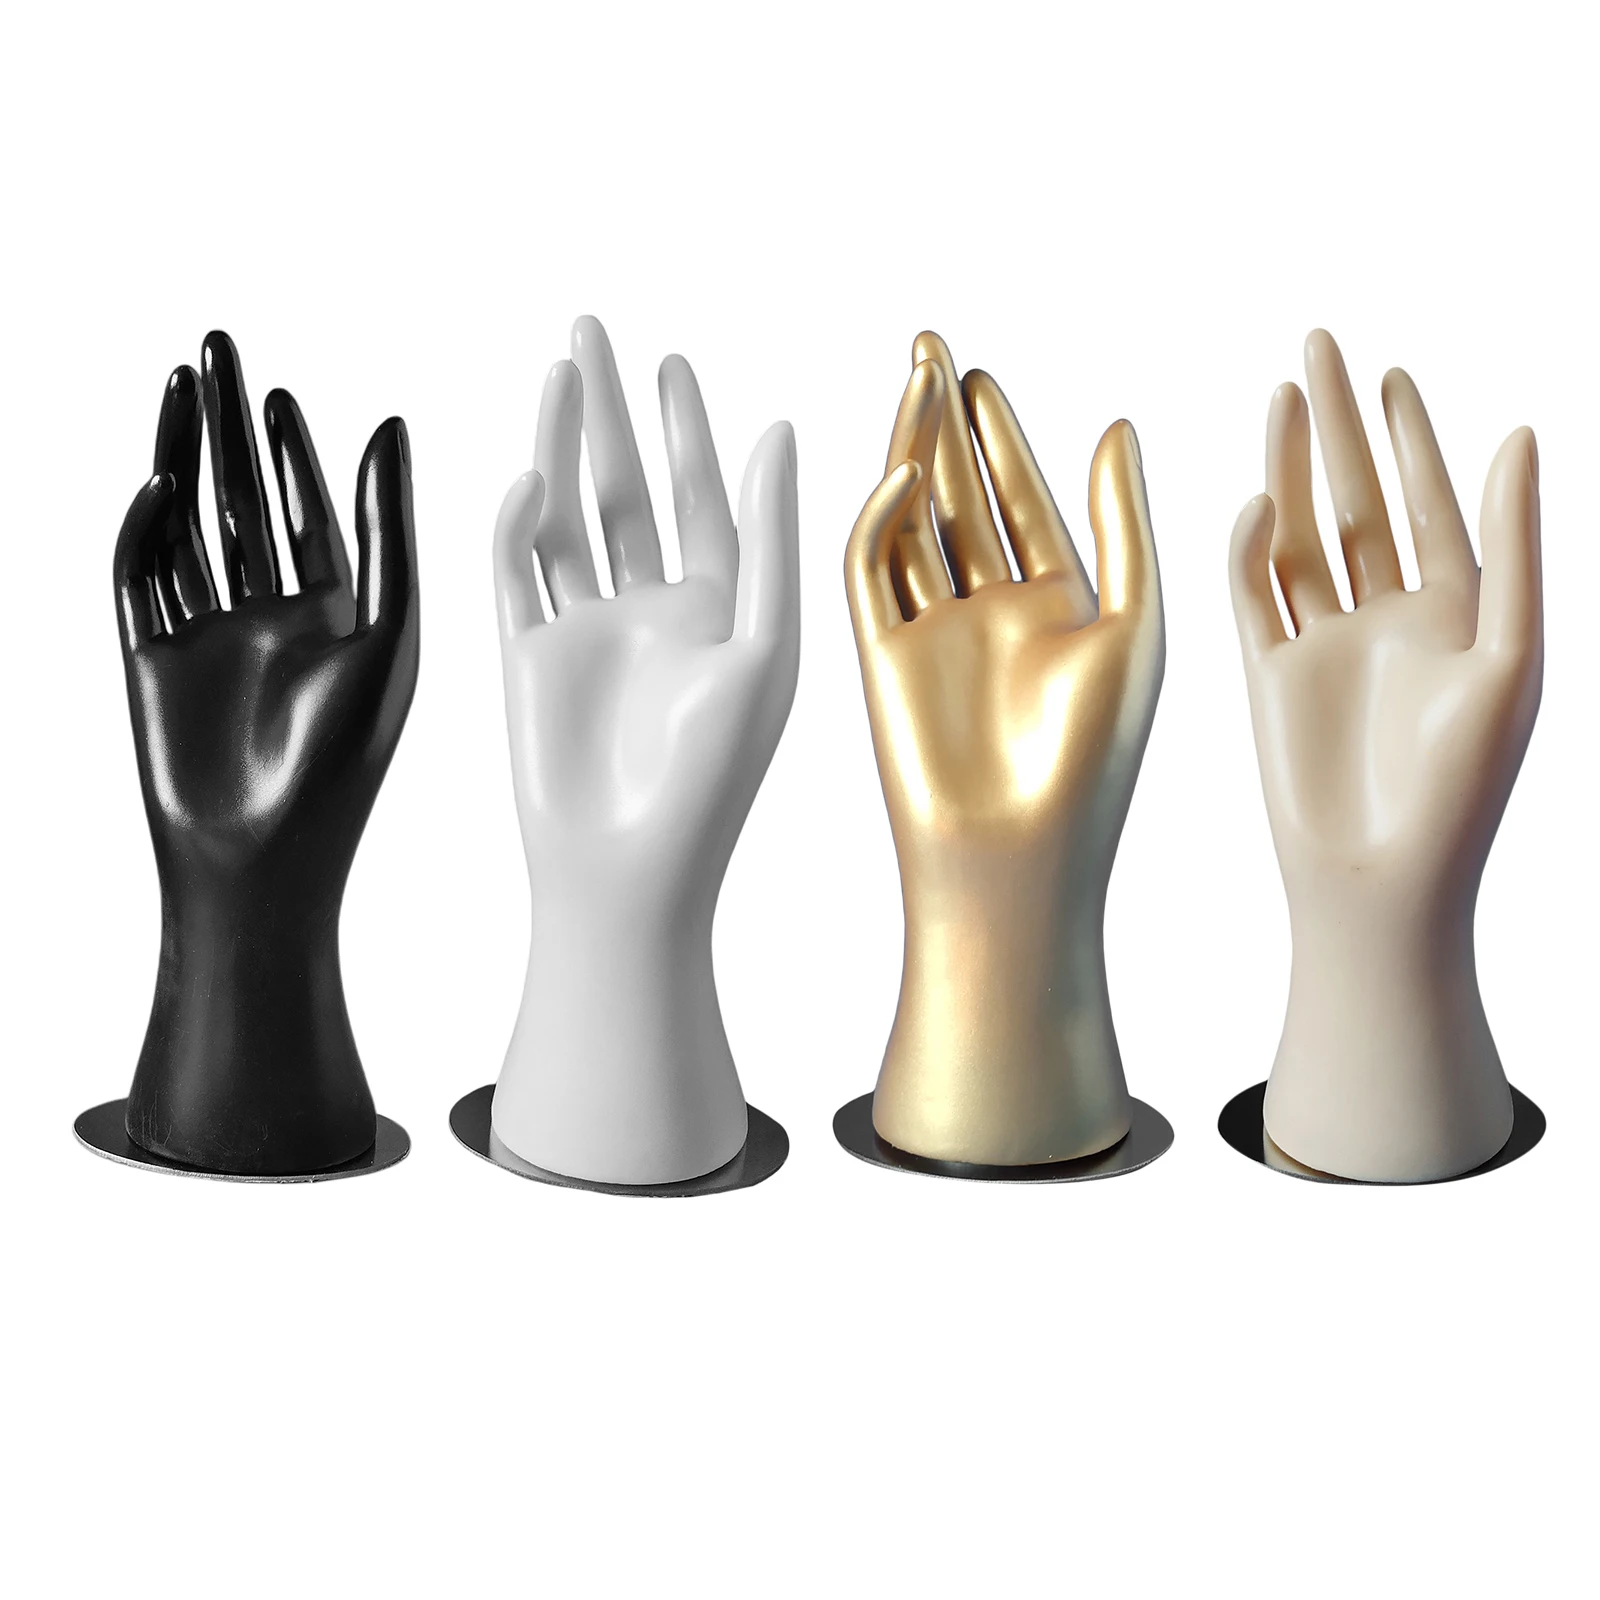 Male Mannequin Hand Jewelry Bracelet Ring Watches Display Organizer Stand Manikin Hand Model 3 Colors 